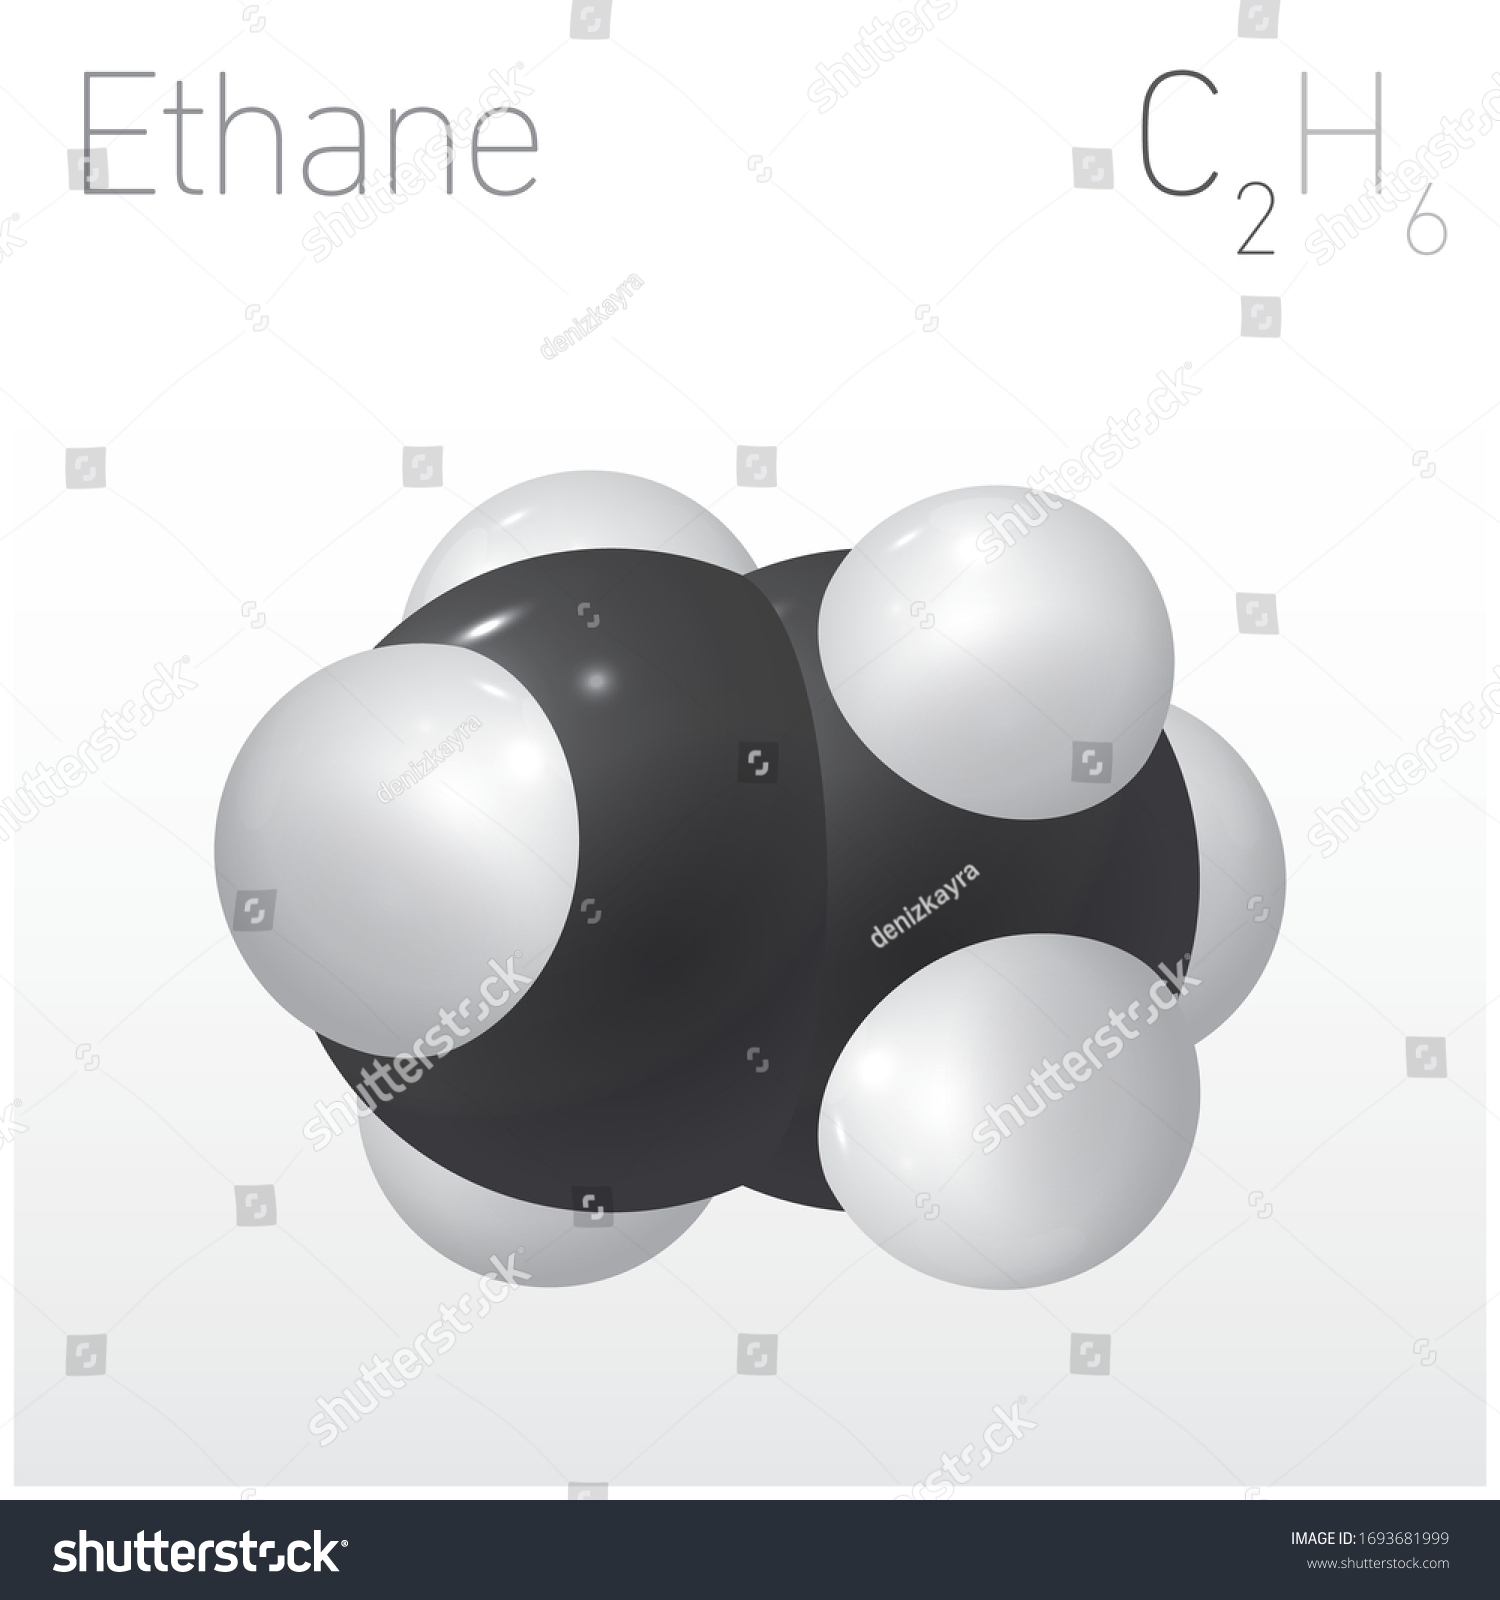 Ethane C2h6 Structural Chemical Formula Molecule Stock Vector (Royalty ...